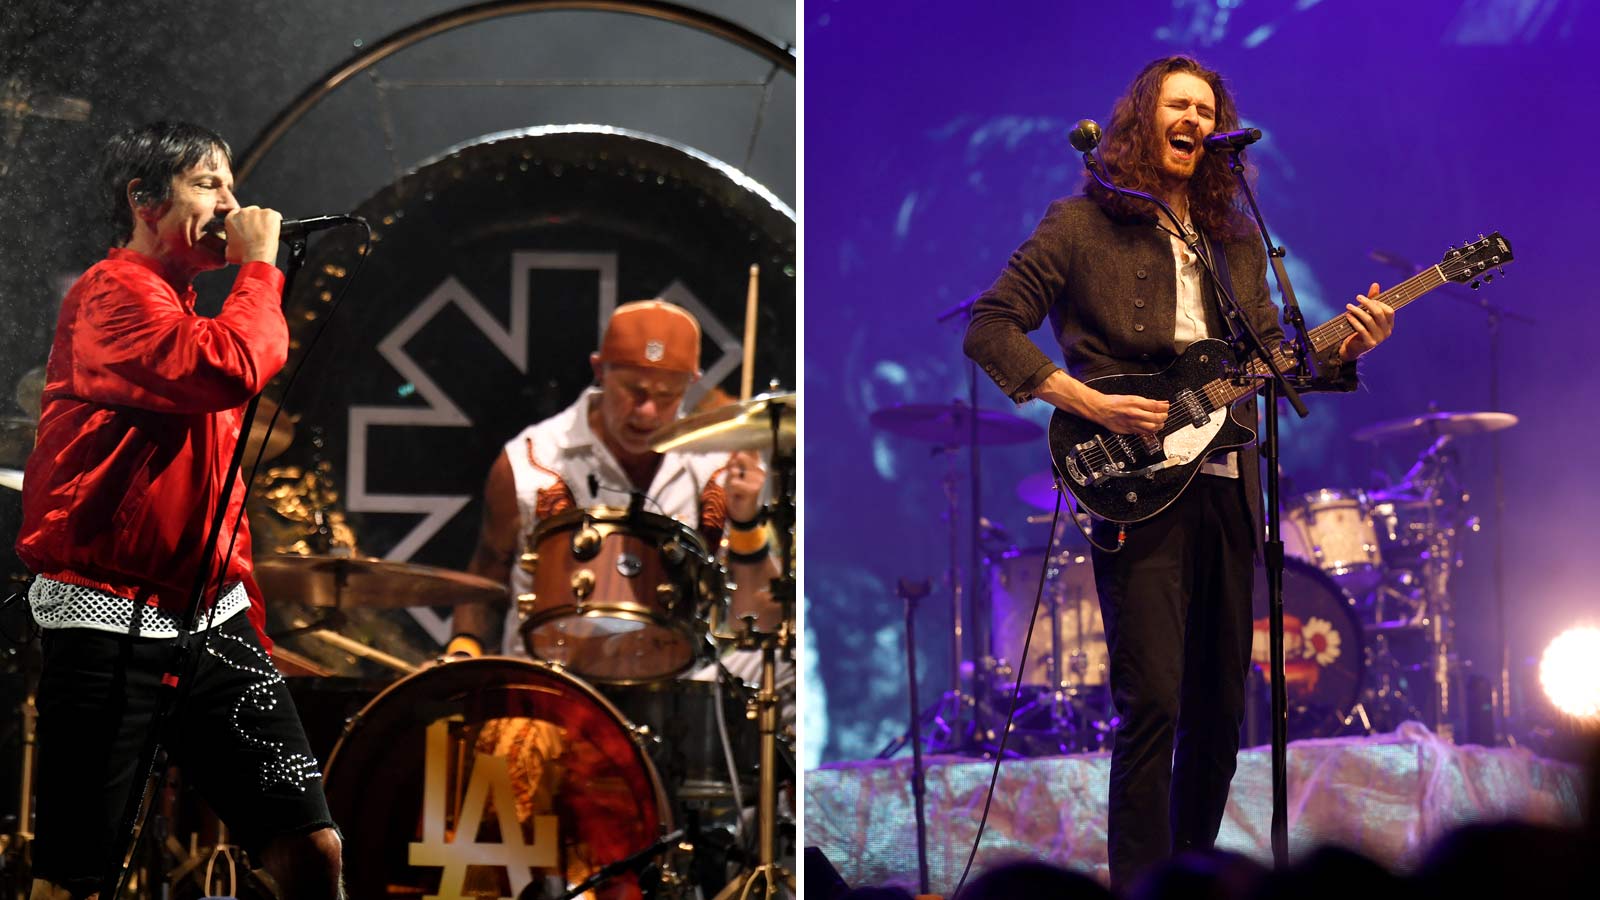 The Red Hot Chili Peppers and Hozier will headline Innings Festival in Tempe, Arizona, on Feb. 23-2...